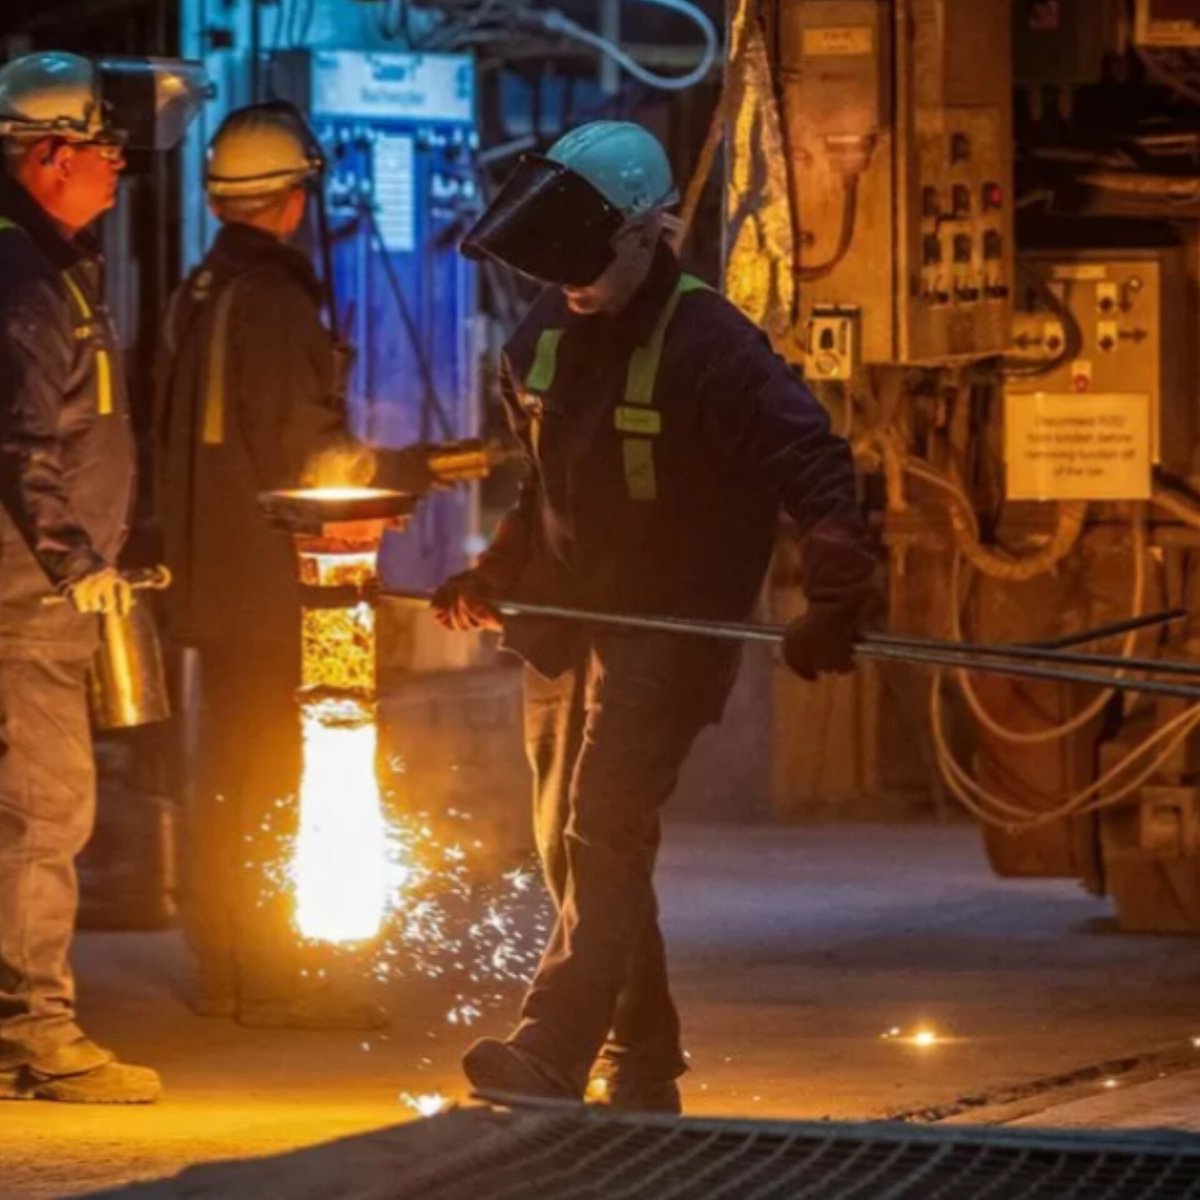 #Unite rejects #TataSteel's decarbonization plan, calls for job protection and #UK steel expansion. Clash with Community and #GMB unions. Ongoing talks, no formal announcement on #decarbonization timeline.

Read more on- shorts91.com/category/busin…

#TataSteel #UKIndustry